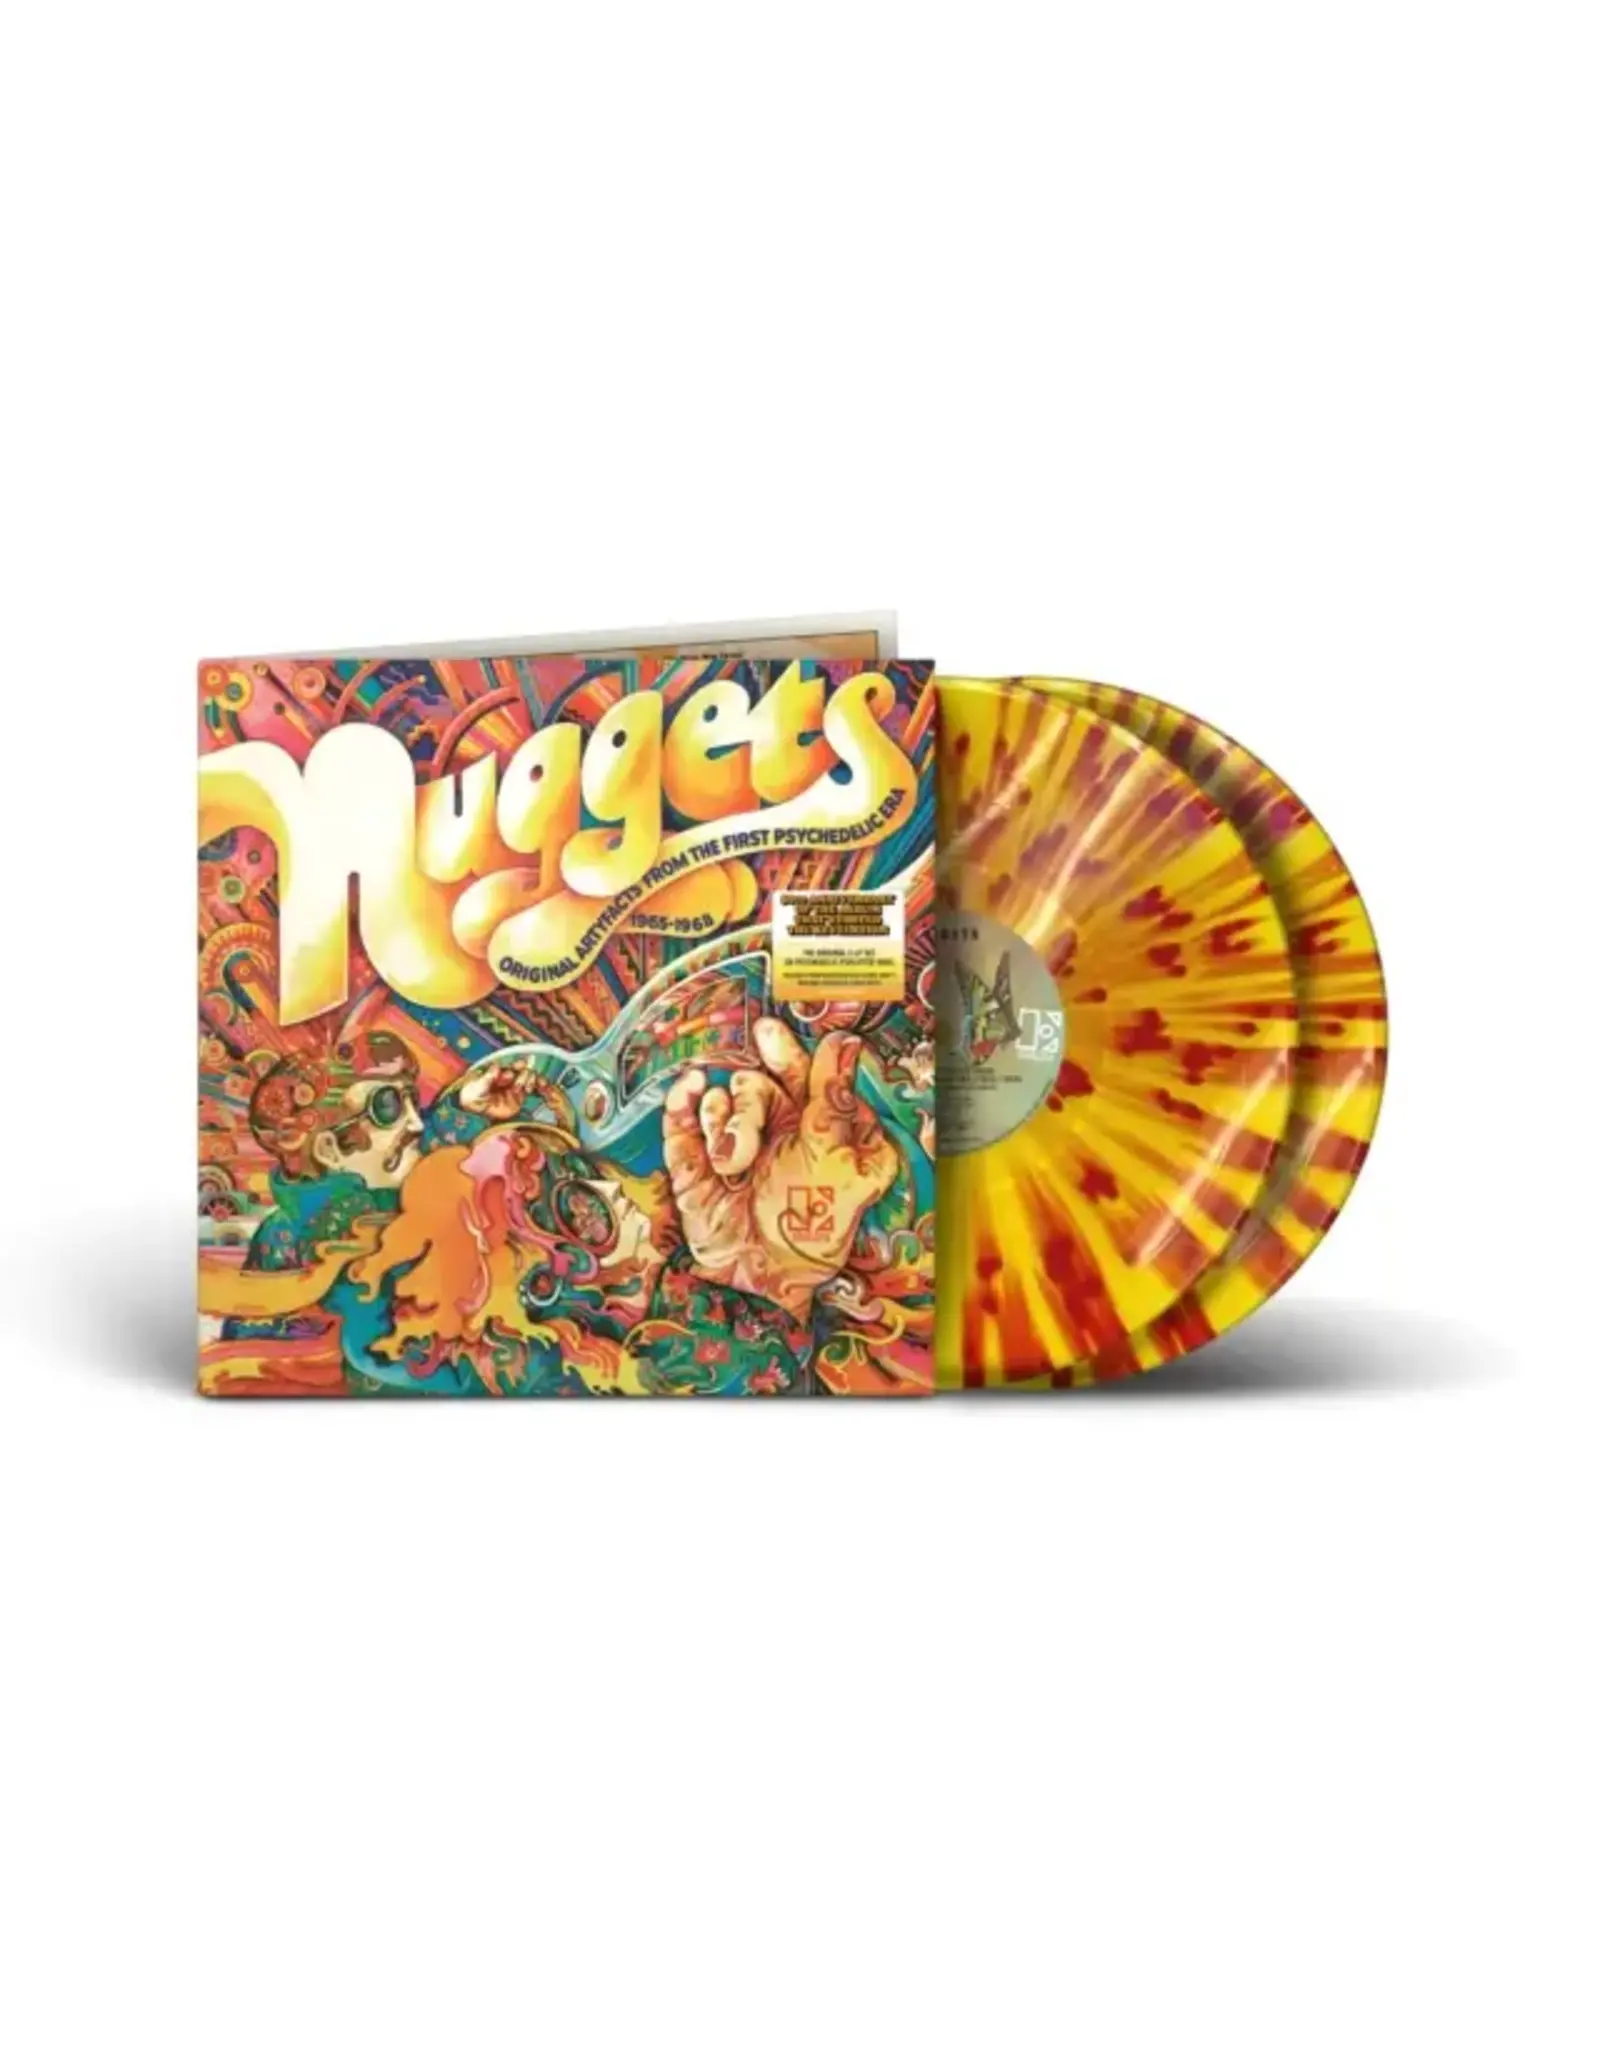 Rhino Various: Nuggets: Original Artyfacts From The First Psychedelic Era (S.Y.E.O.R. 2024 Psychedelic) LP